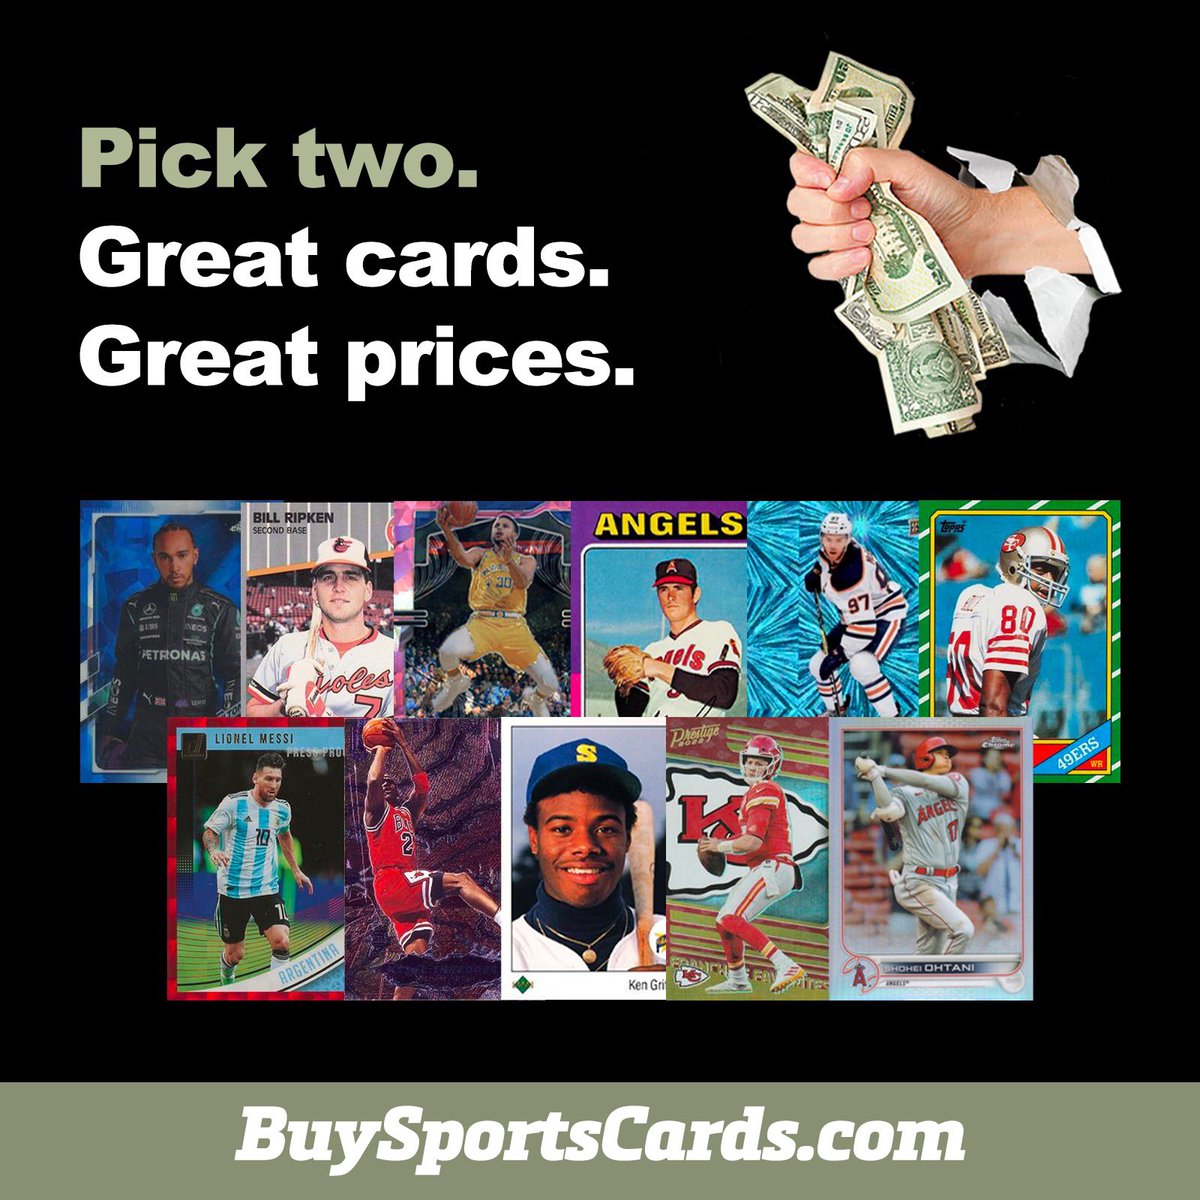 Get the best deals from your collection on BuySportsCards.com 🙂 #TheHobby #SportsCards